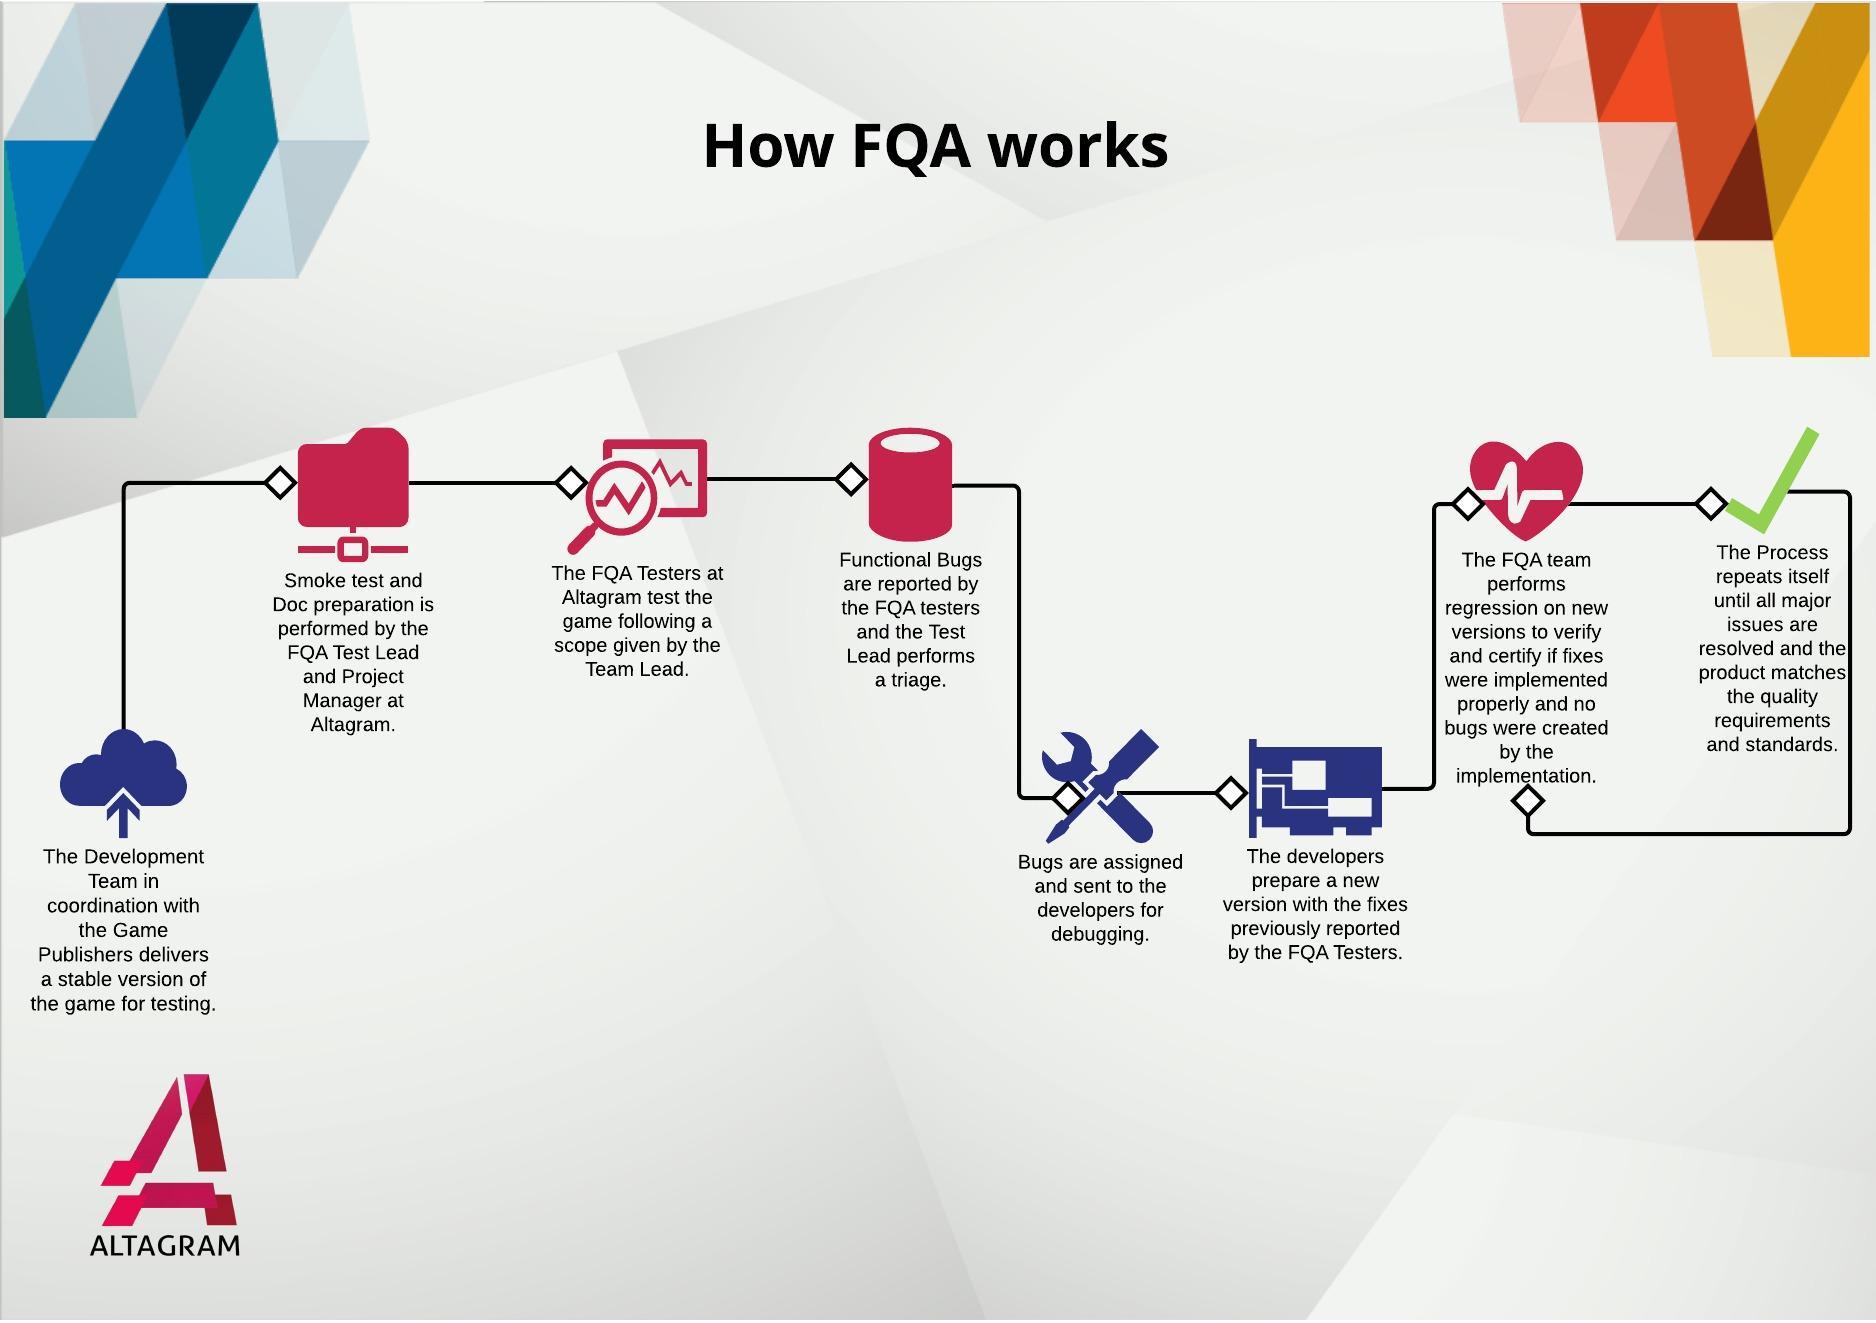 How FQA works